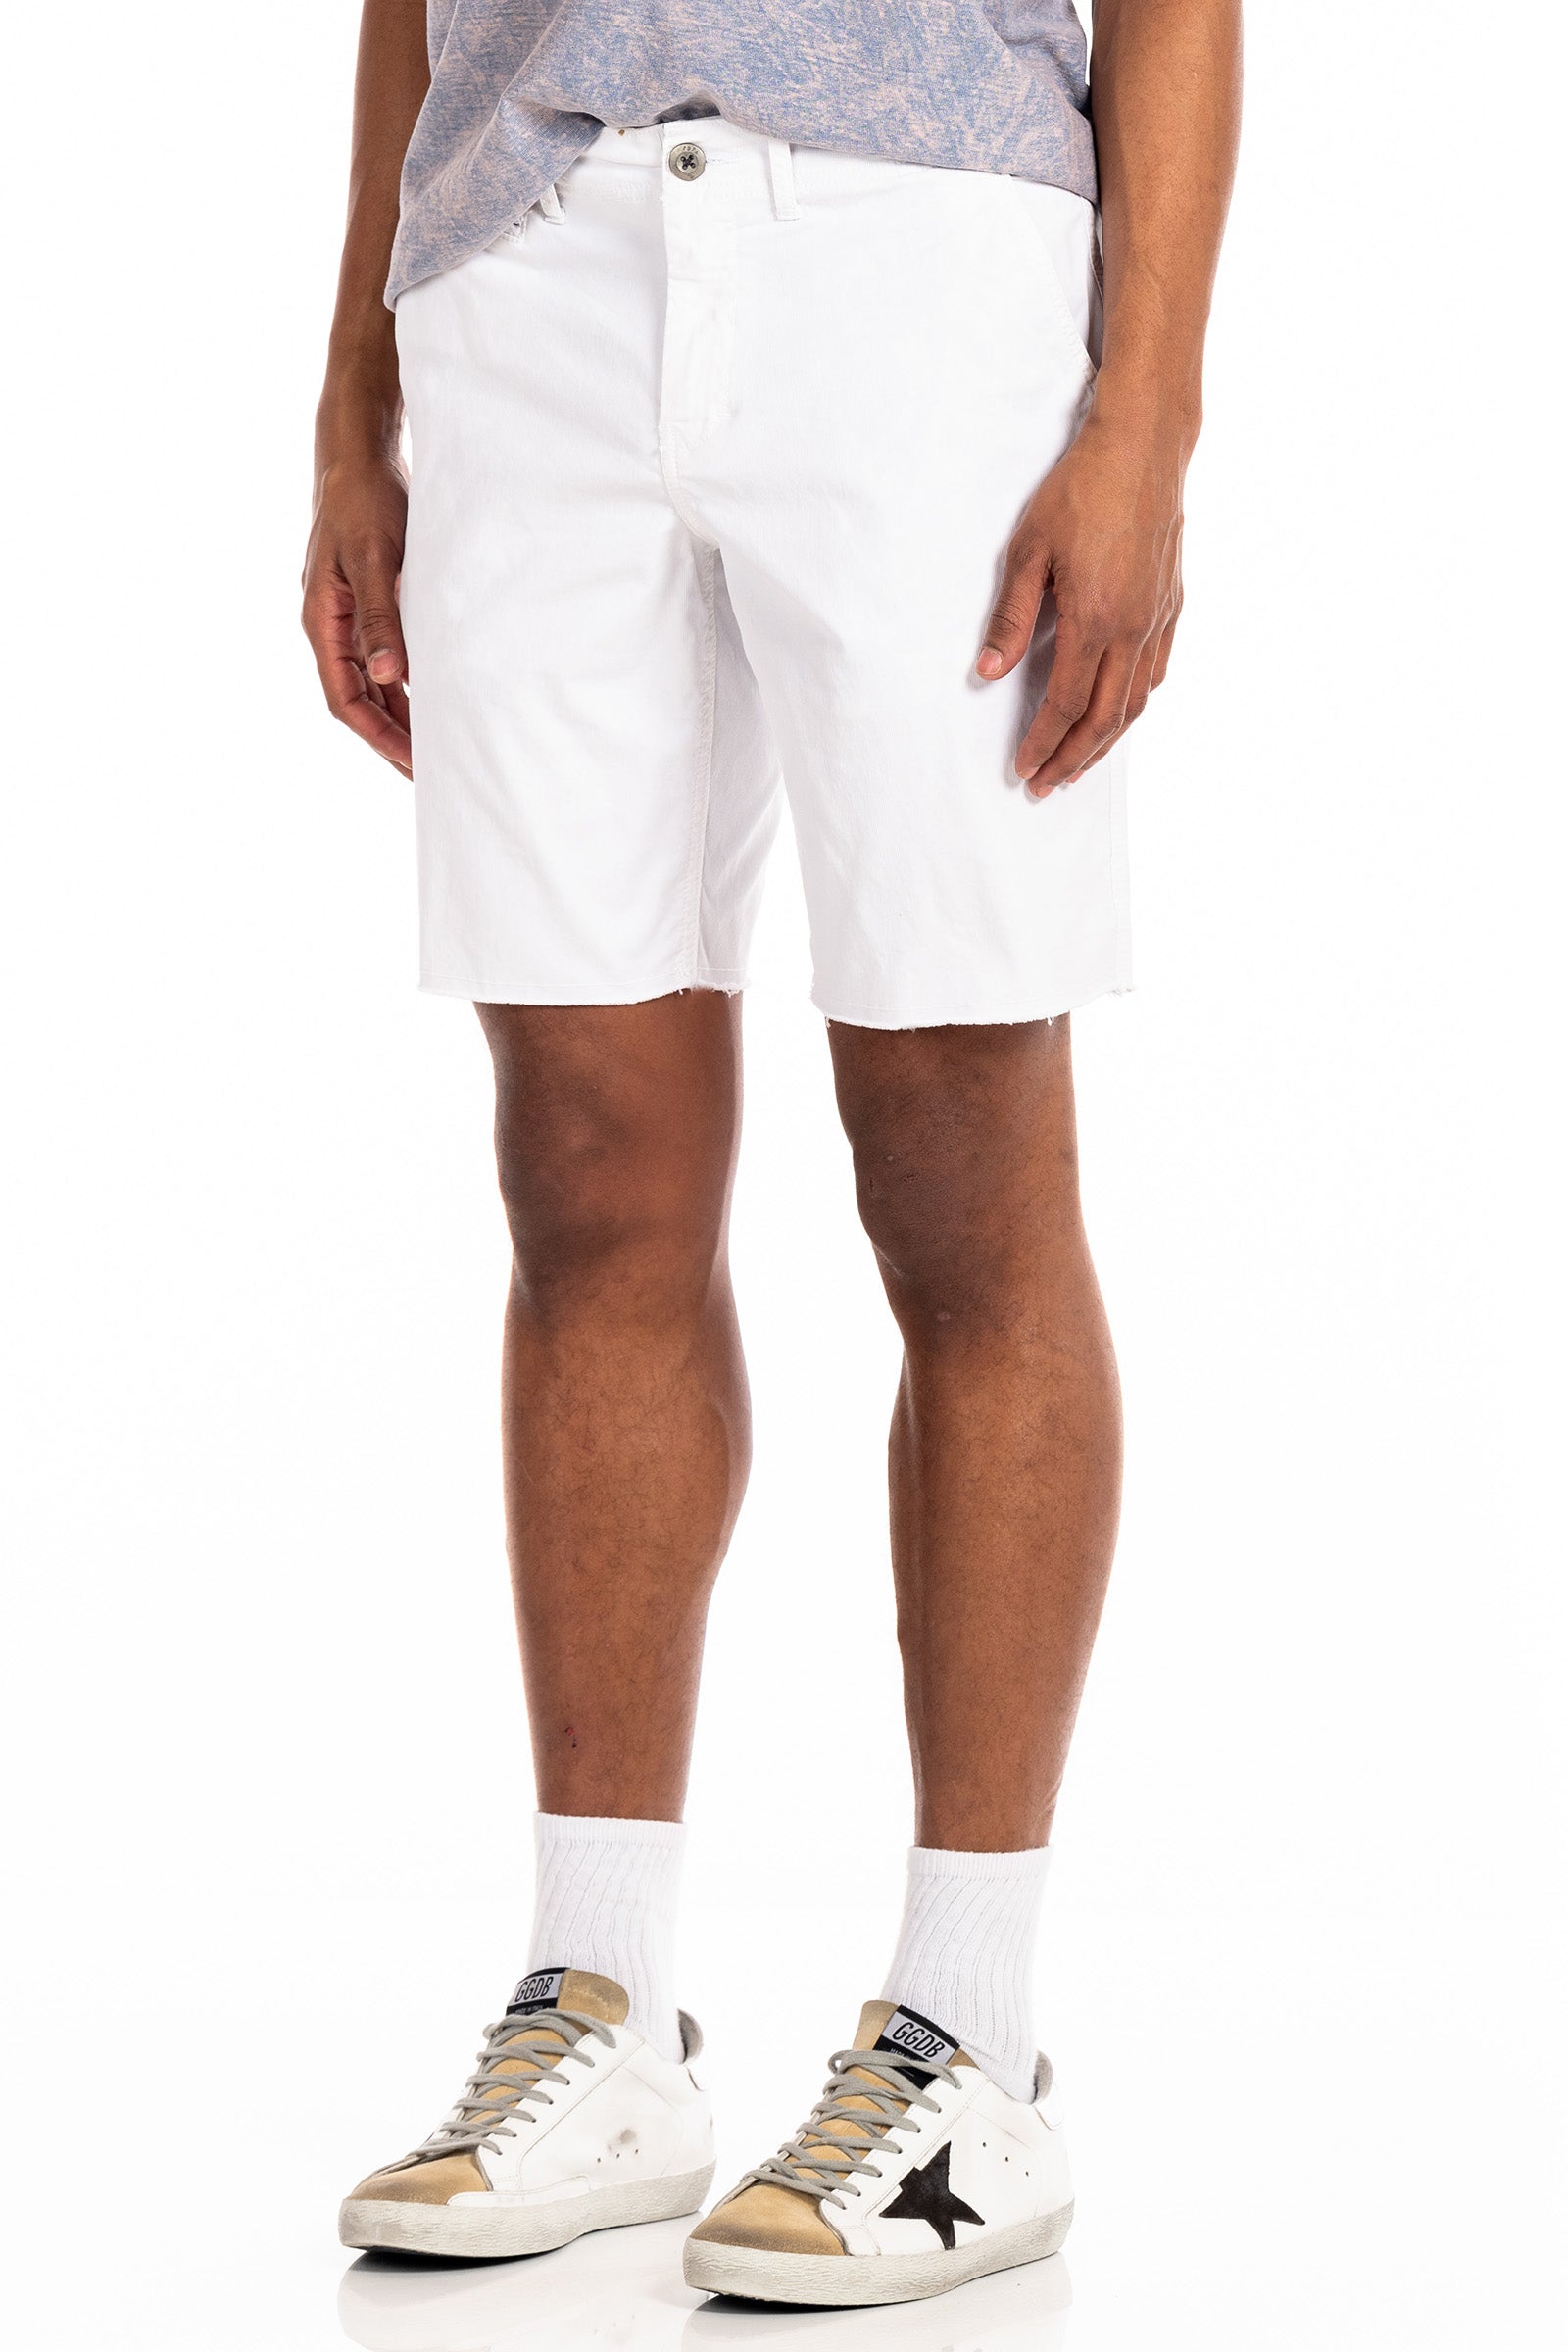 Original Paperbacks Brentwood Chino Short in White on Model Cropped Side View